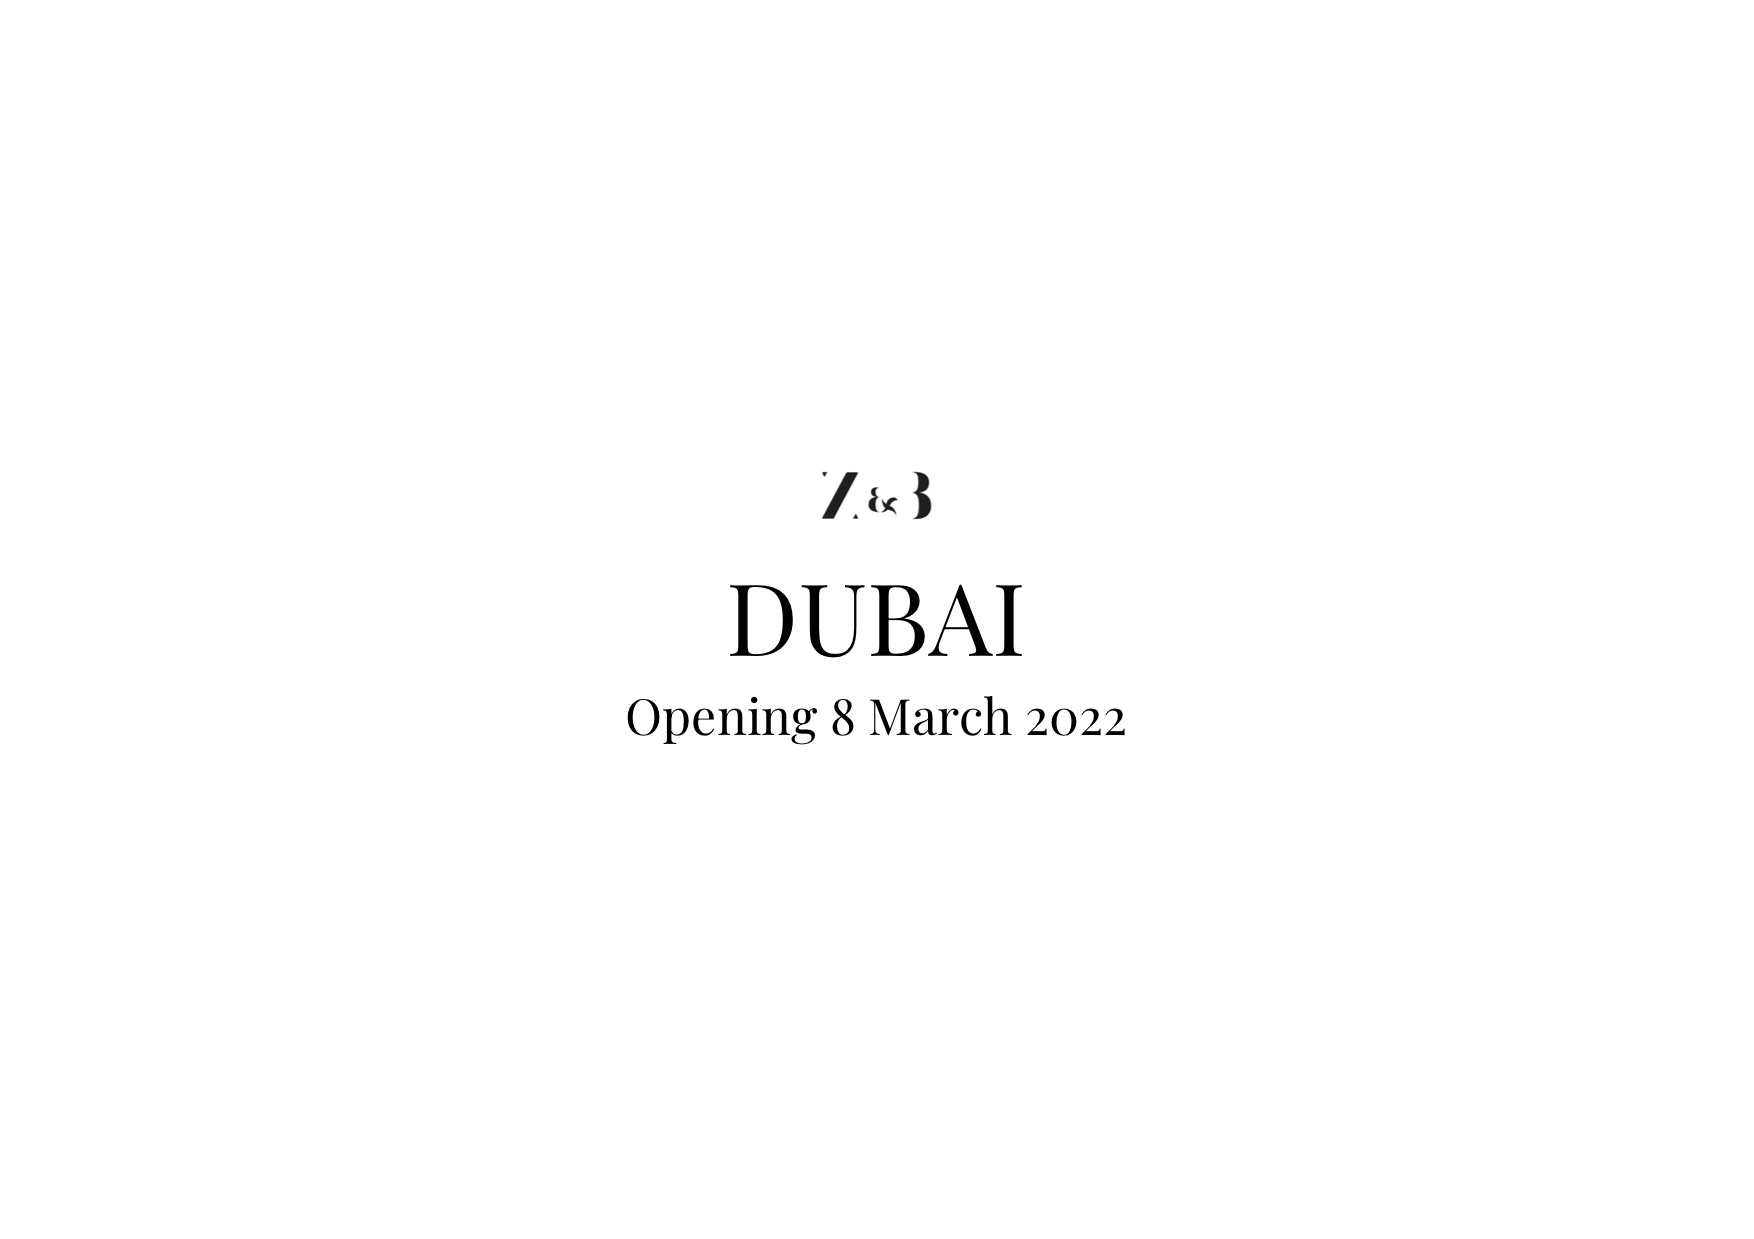 UPCOMING OPENING SHOW / 8 MARCH 2022 / DUBAI